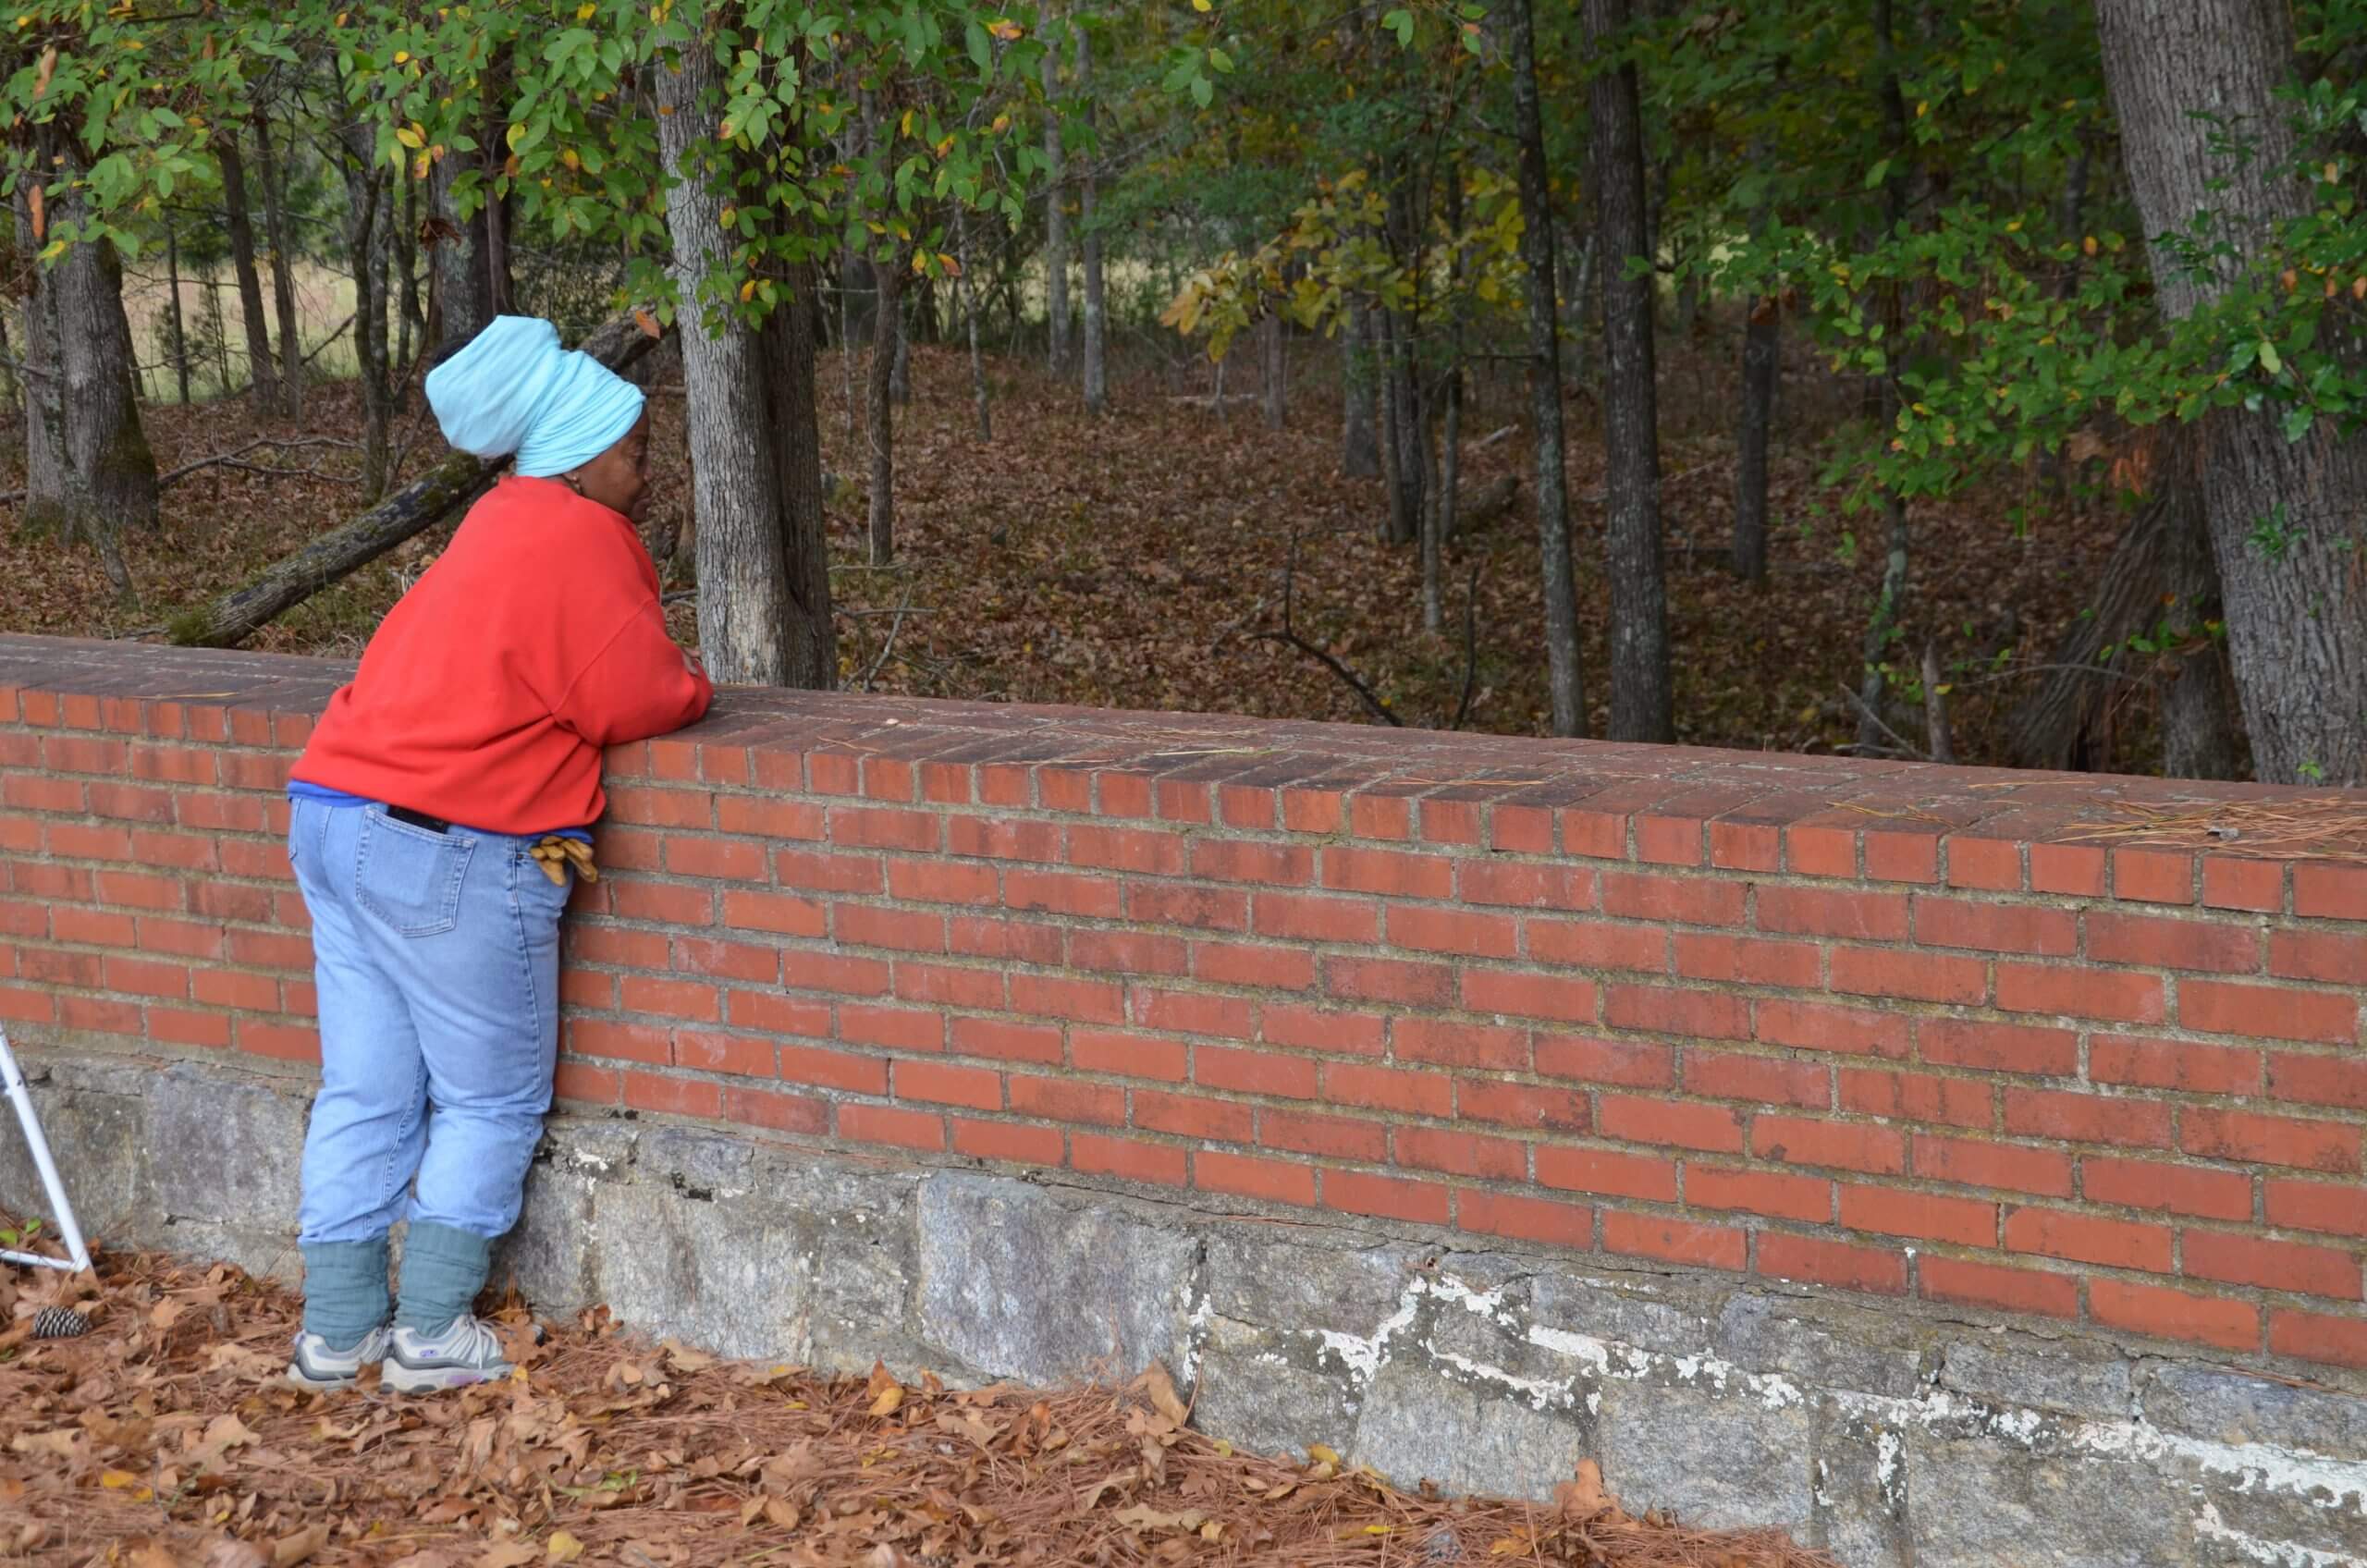 Still from Acts of Reparation. Full shot of a woman standing while leaning on a short wall in the forest. She wears a red hoodie and light blue jeans.